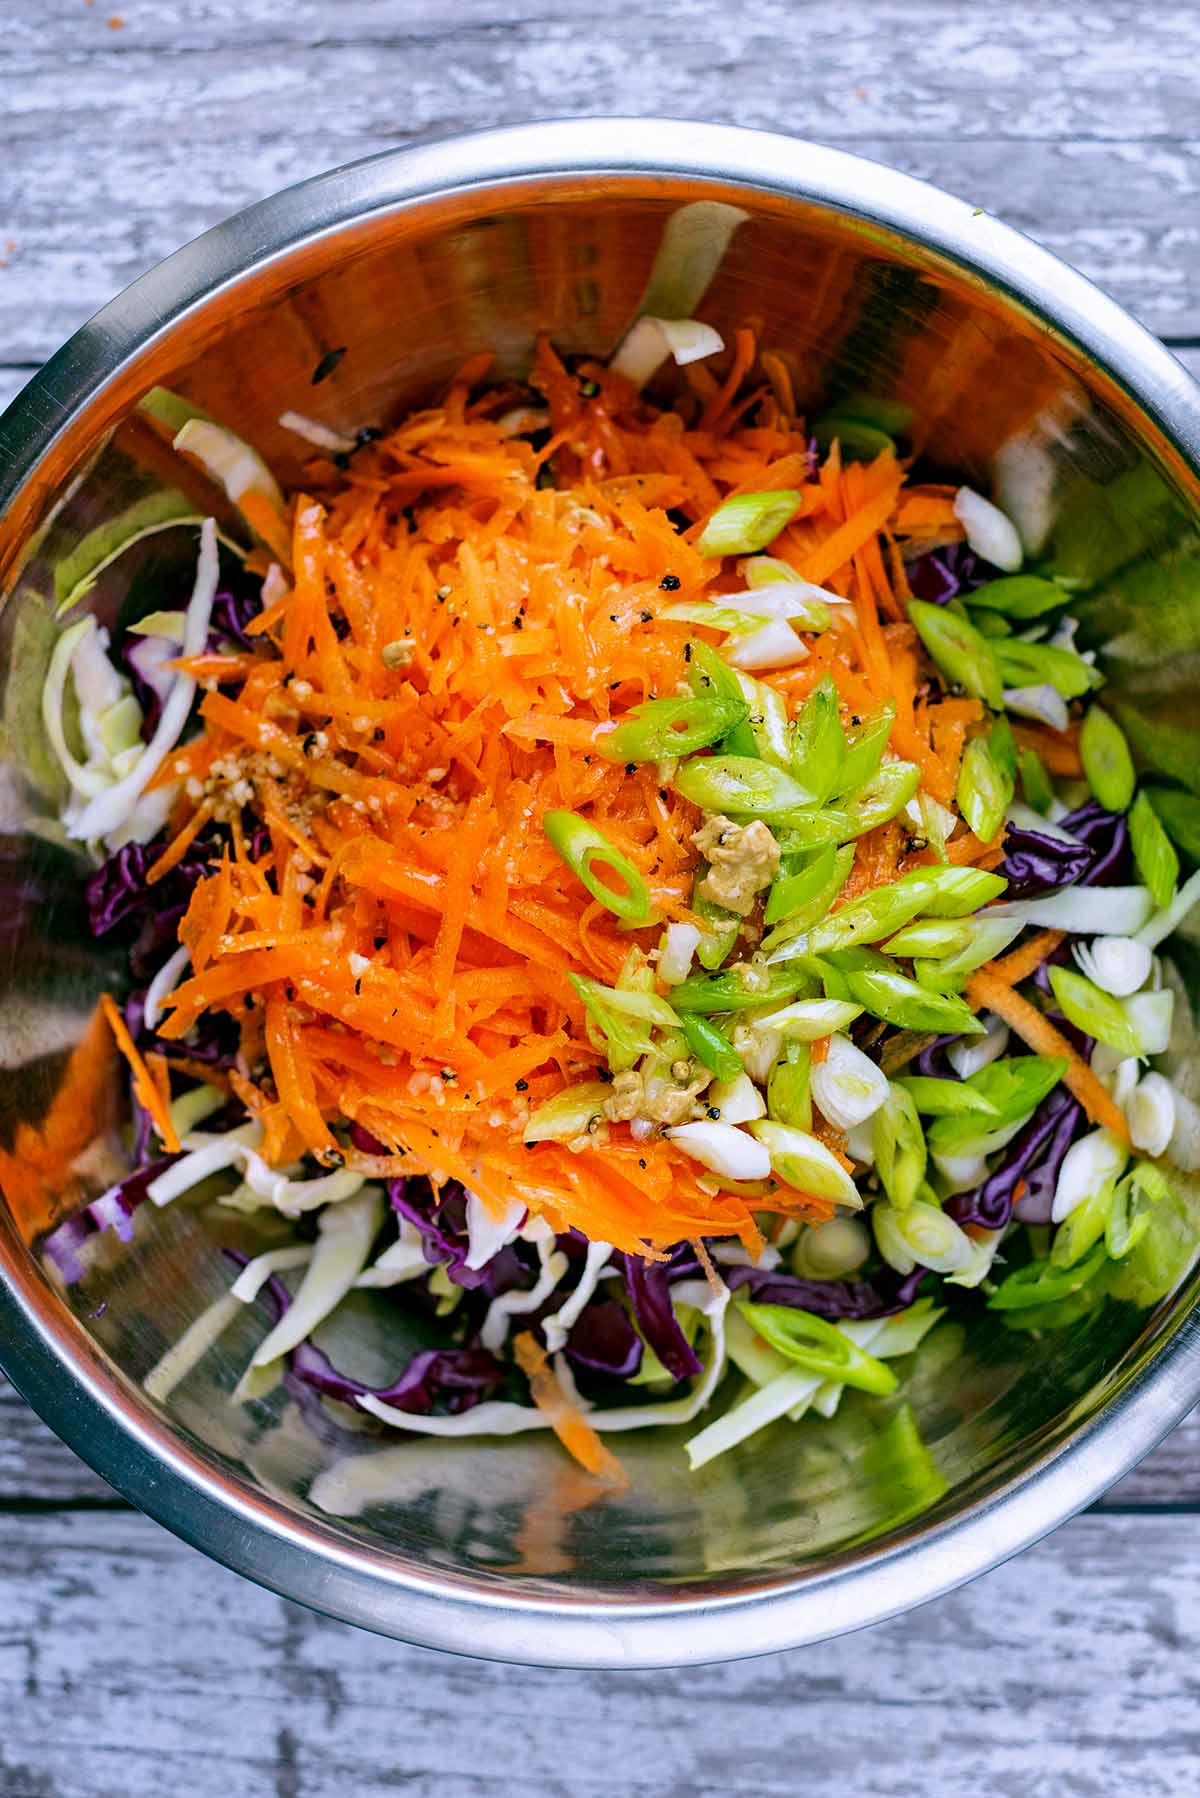 A large mixing bowl containing coleslaw ingredients.